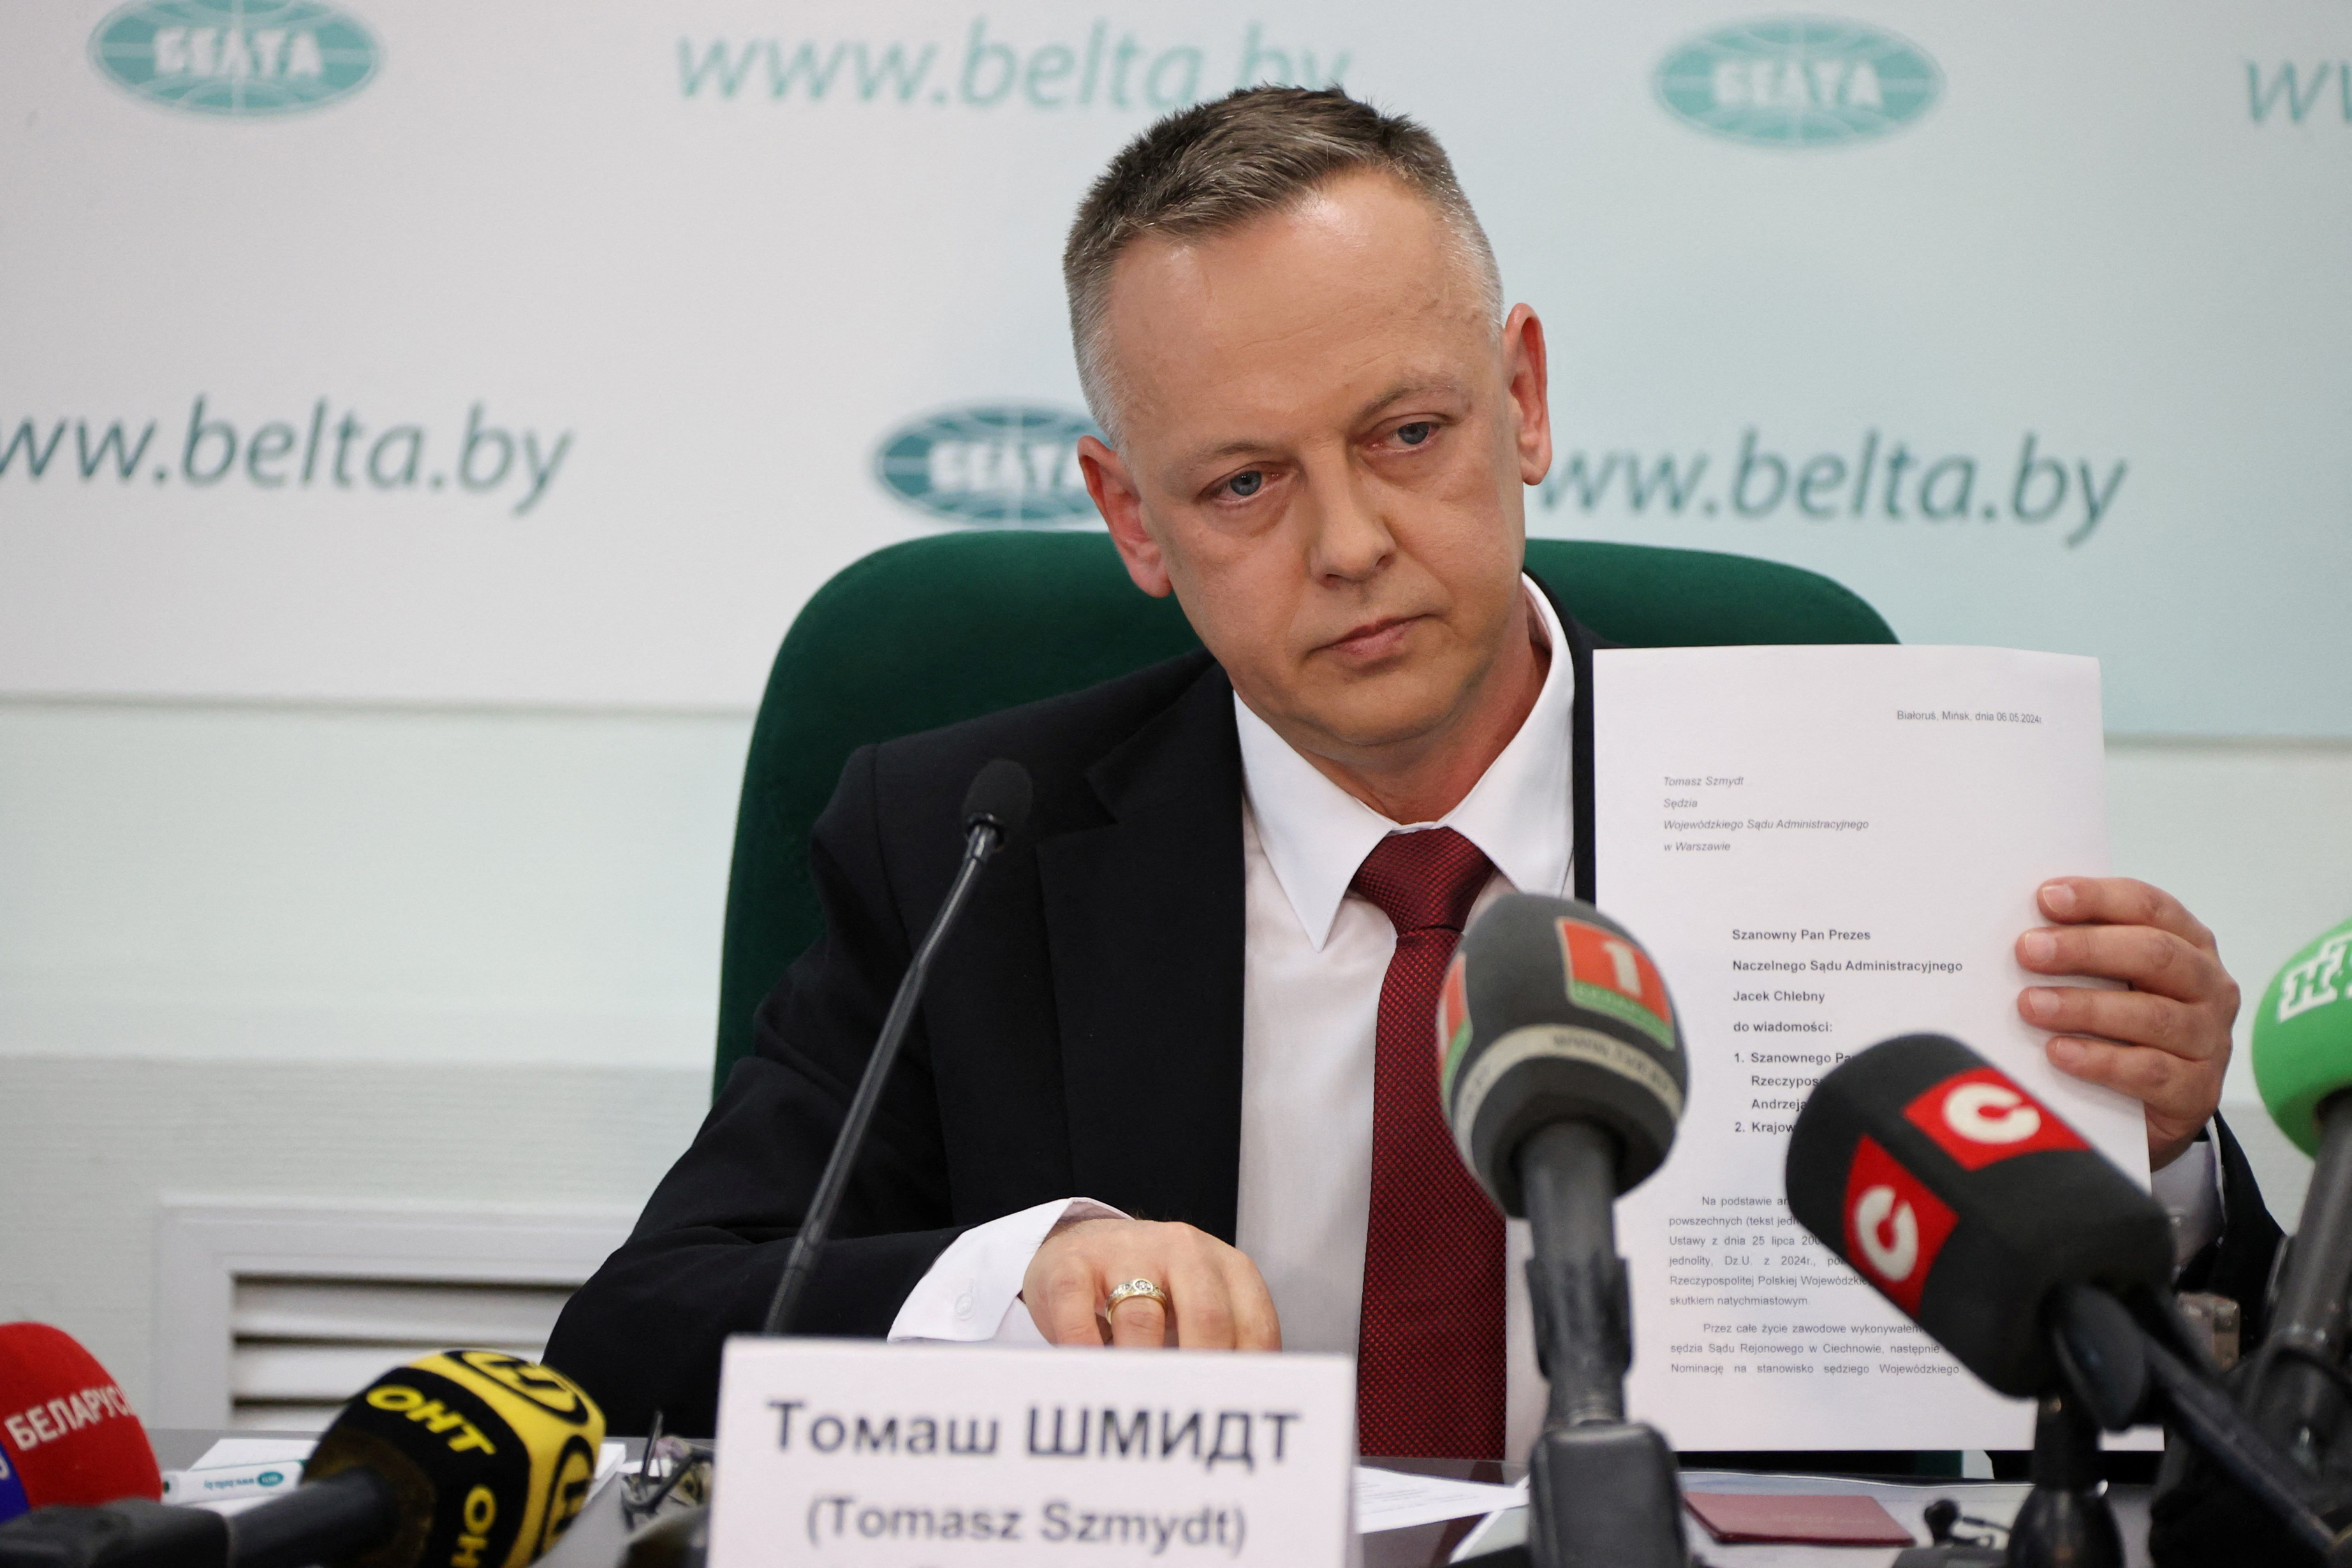 Tomasz Szmydt, a Polish judge who requested political asylum in Belarus, attends a press conference in Minsk